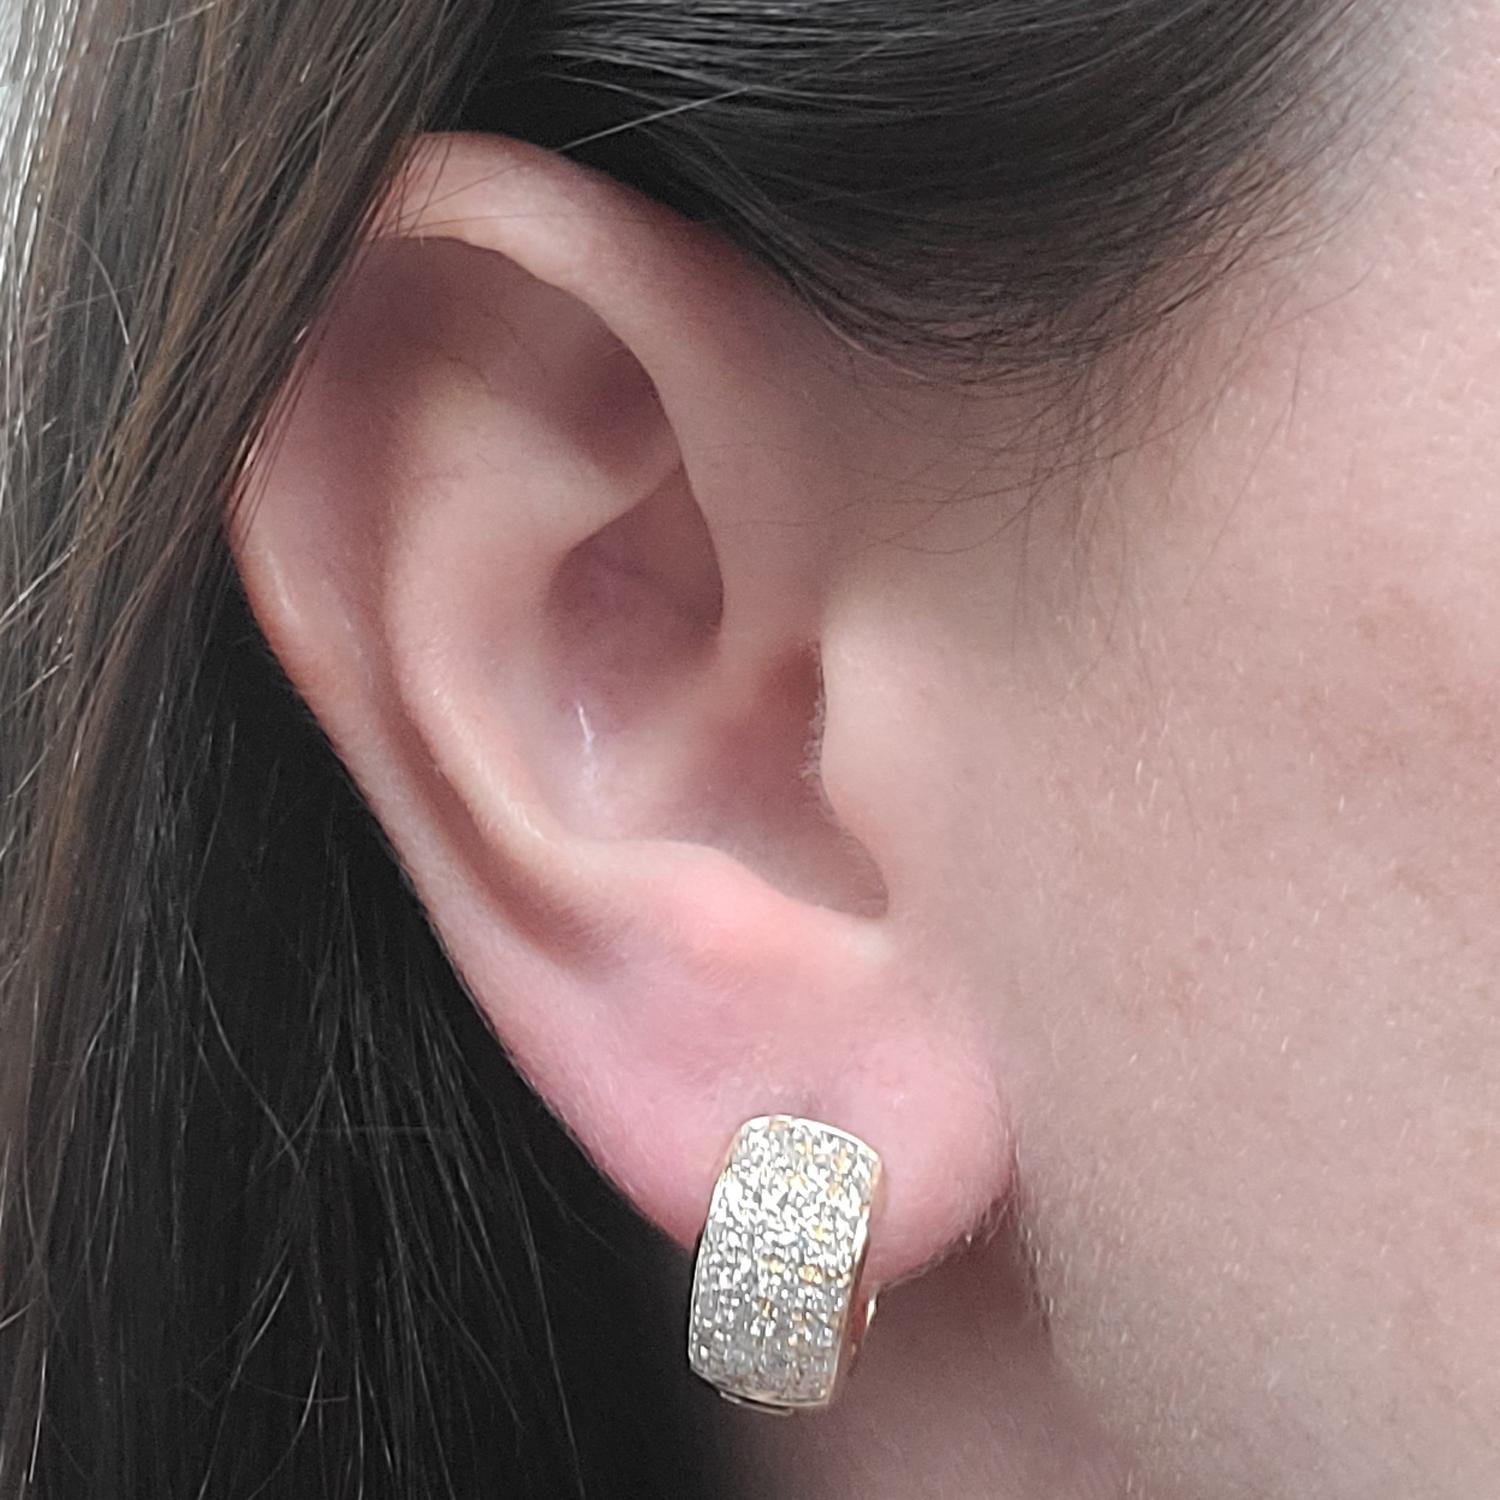 14 Karat Yellow Gold Rounded Pave Huggie Hoop Earrings Featuring 64 Round Brilliant Cut Diamonds Of VS Clarity & G/H Color Totaling Approximately 1.00 Carat. Finished Weight Is 7.8 Grams. Post With Hinged Snap Back.